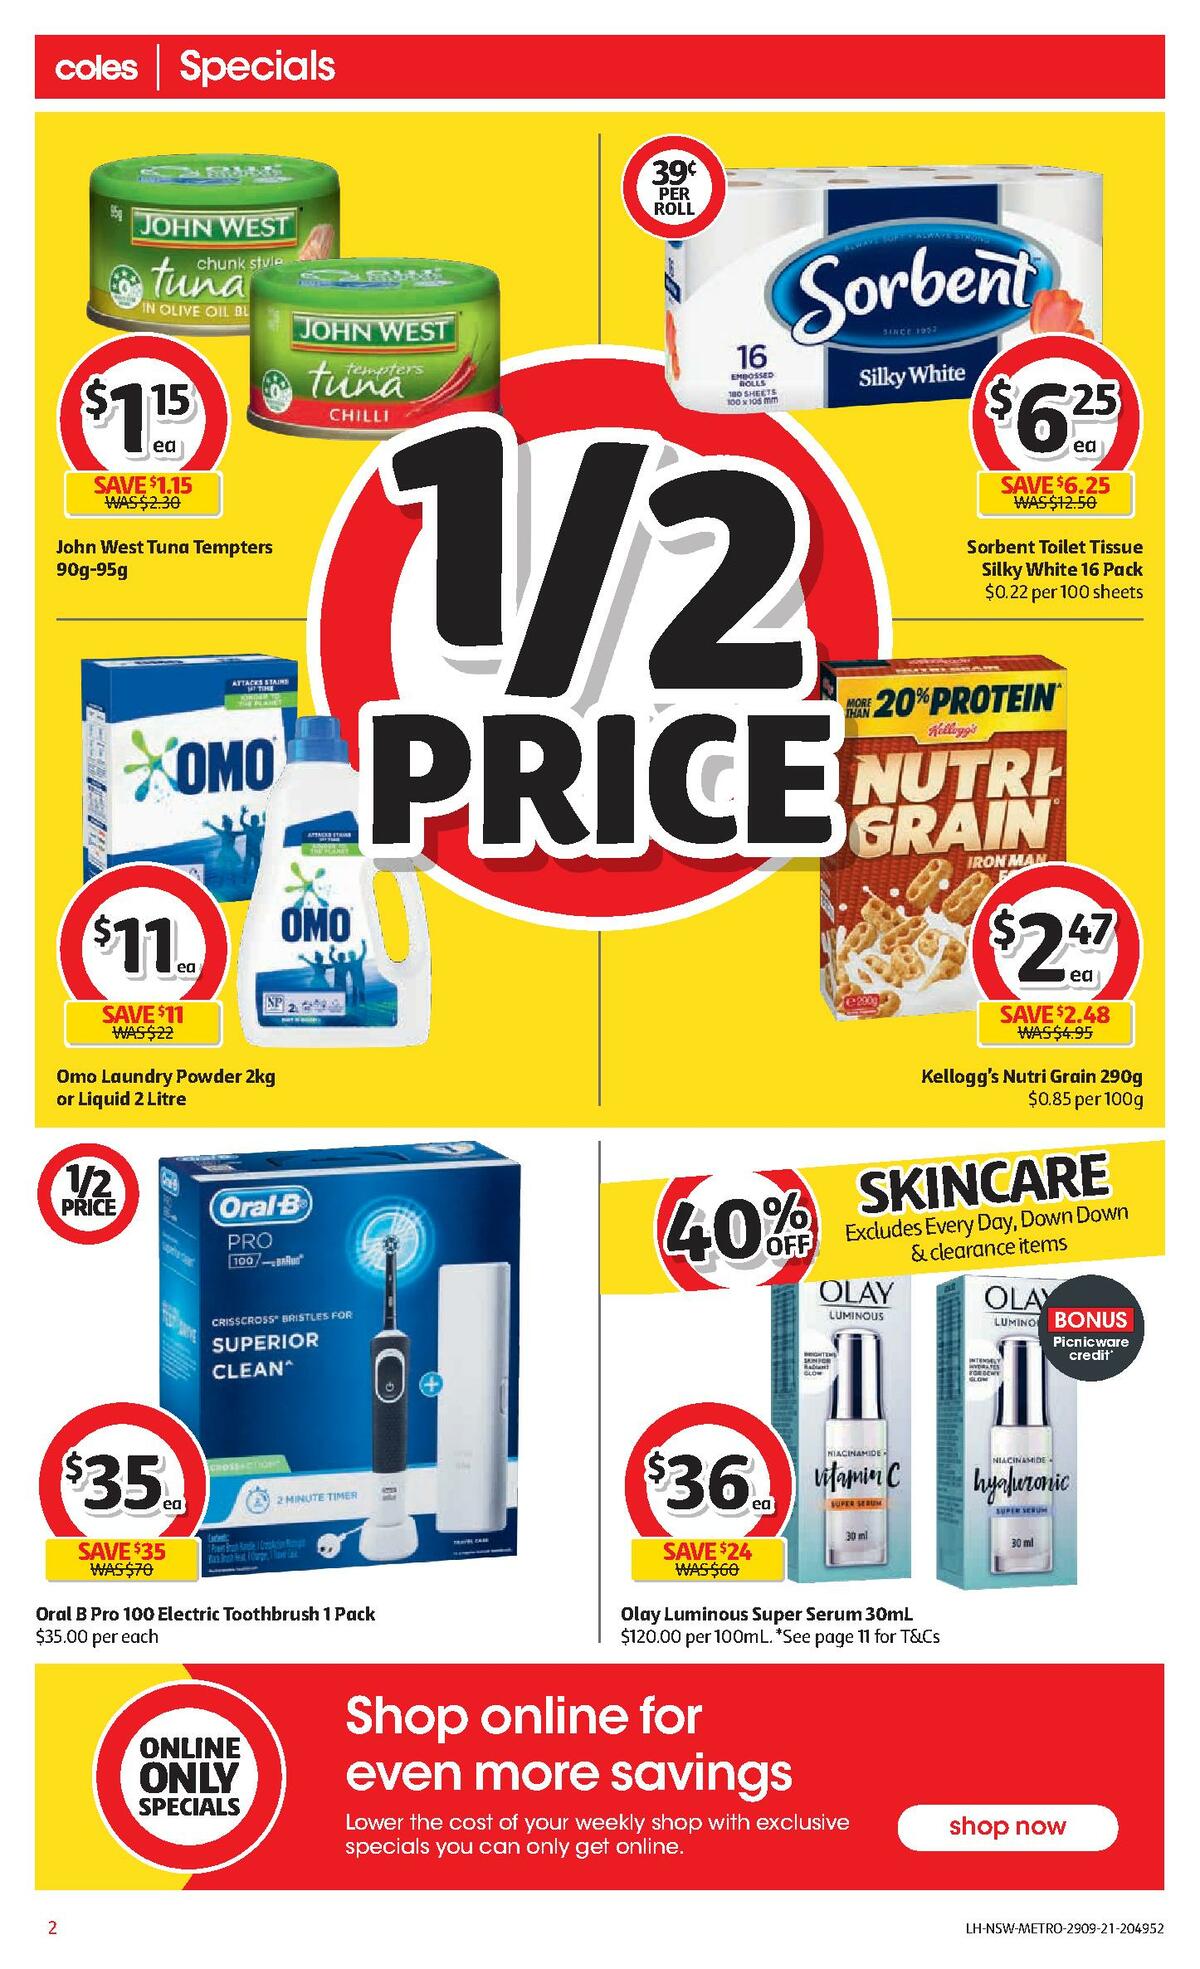 Coles Catalogues from 29 September